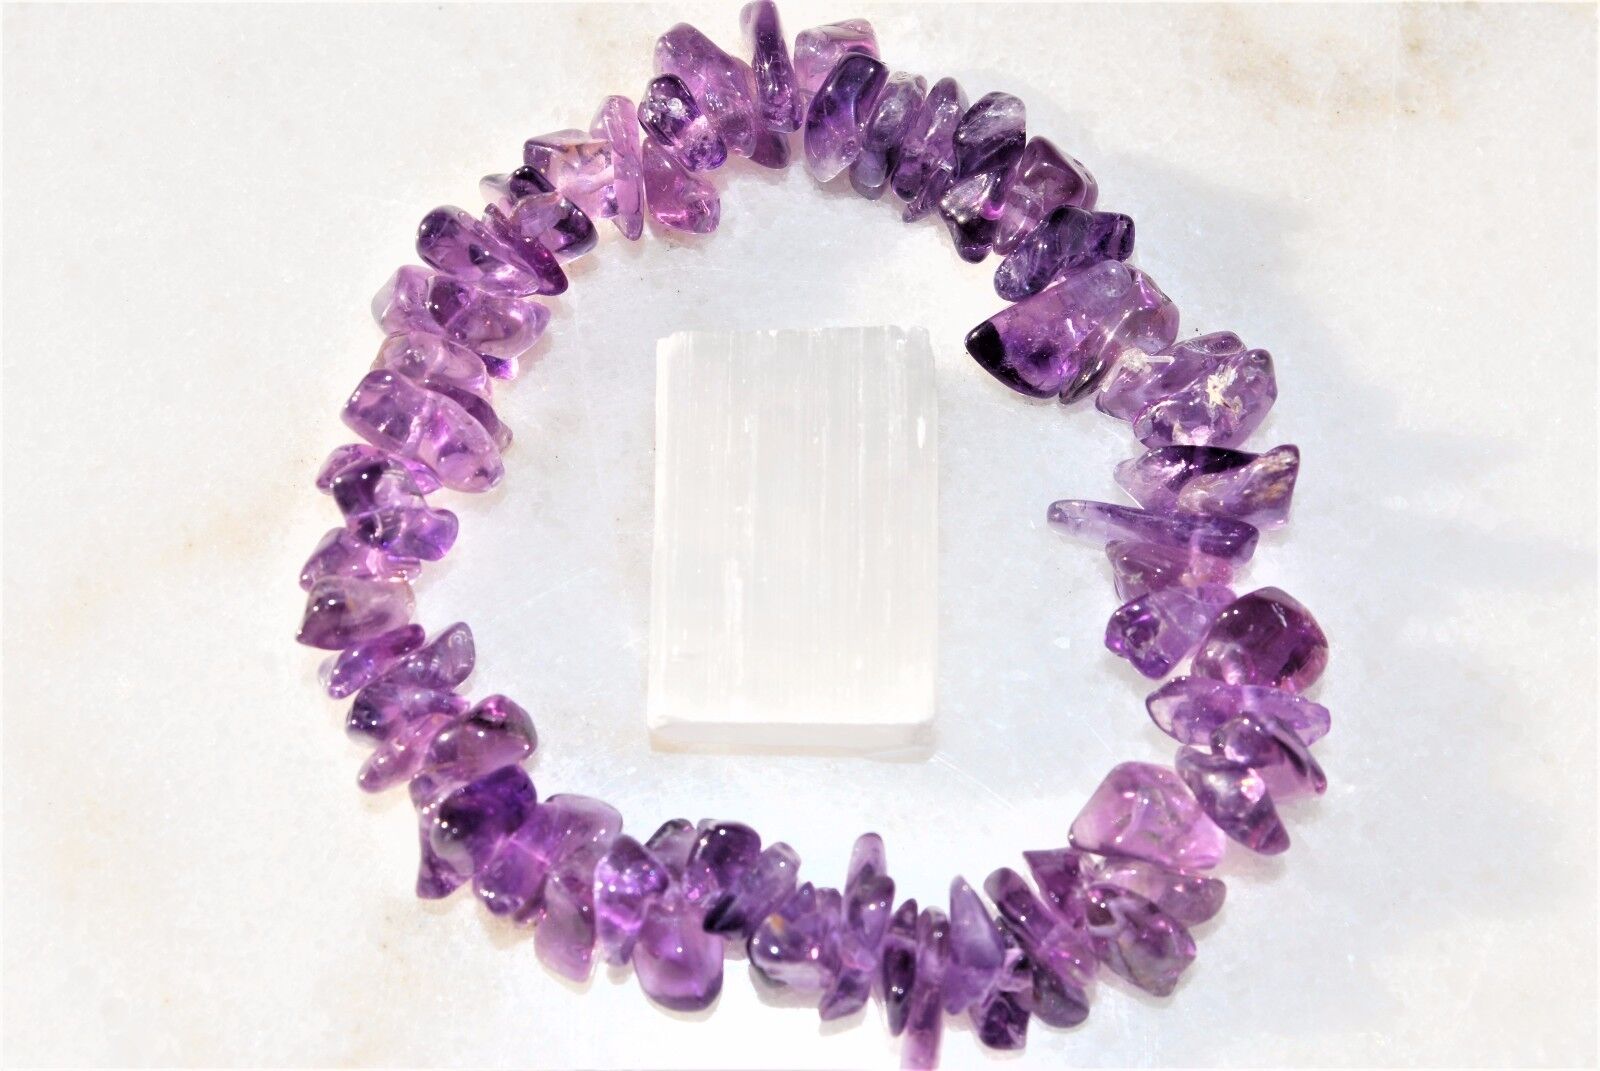 CHARGED Premium (Light) Natural Amethyst Crystal Chip Stretchy Bracelet + Heart